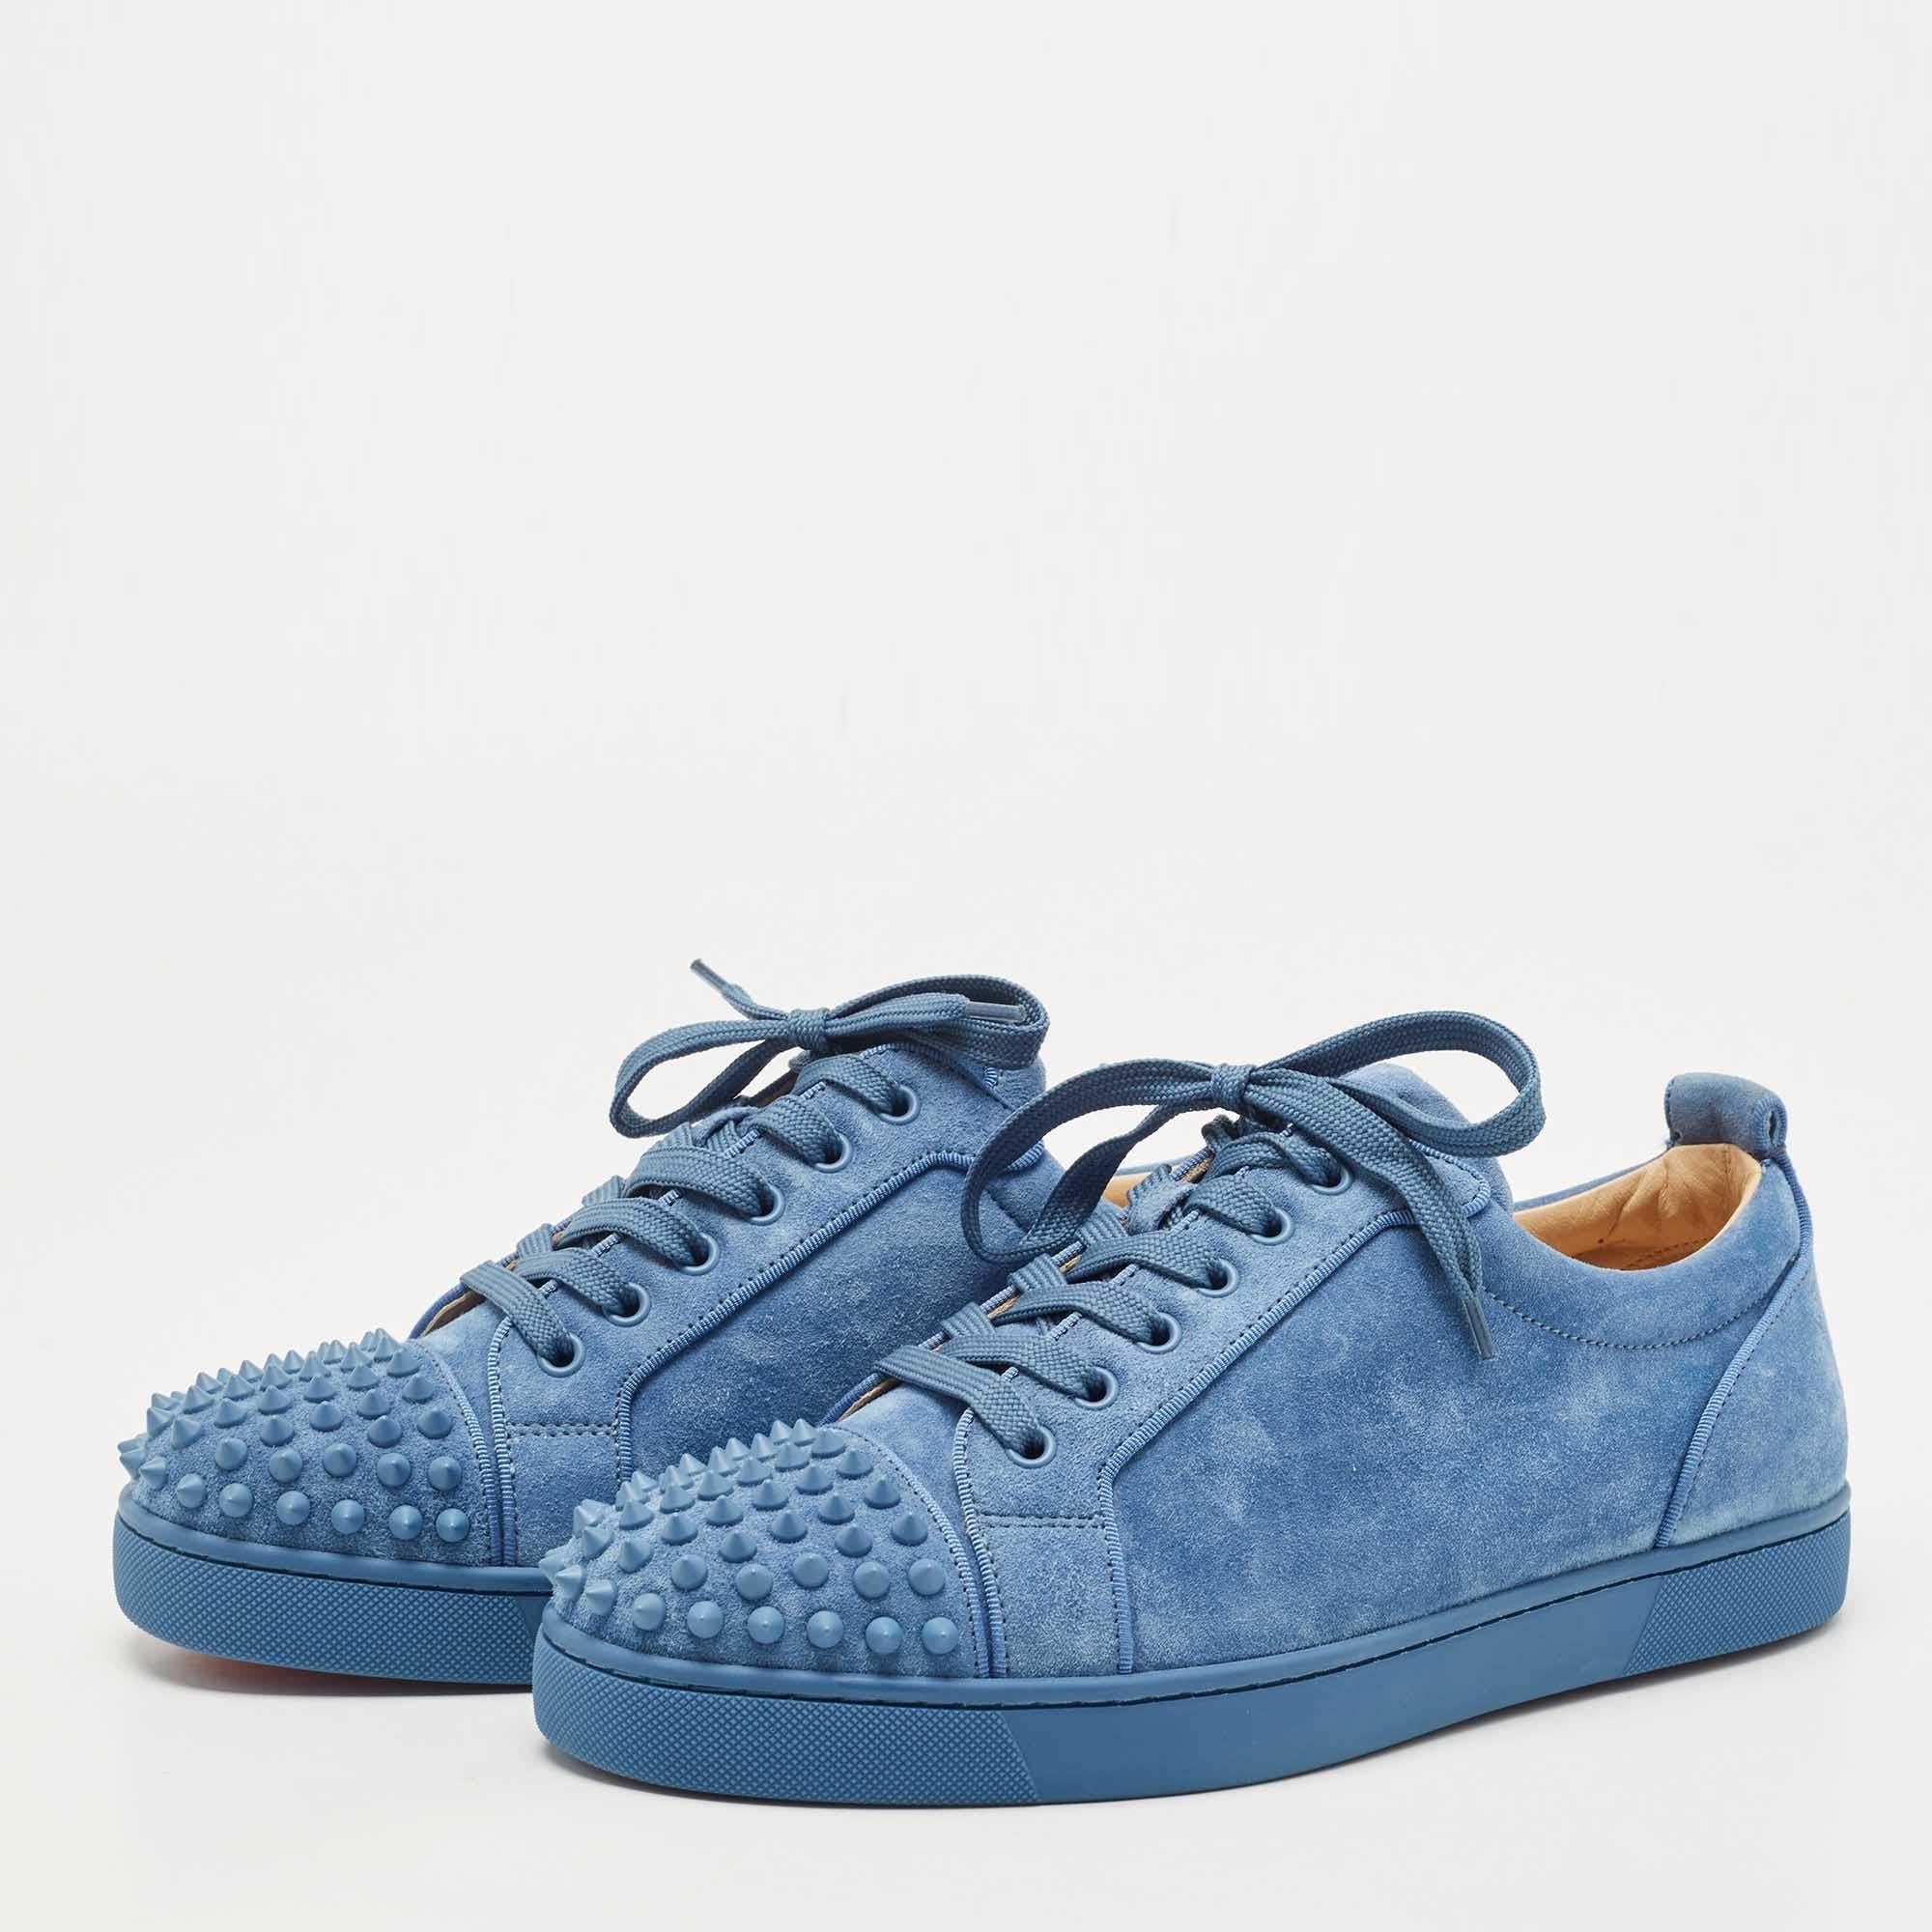 christian louboutin blue suede sneakers